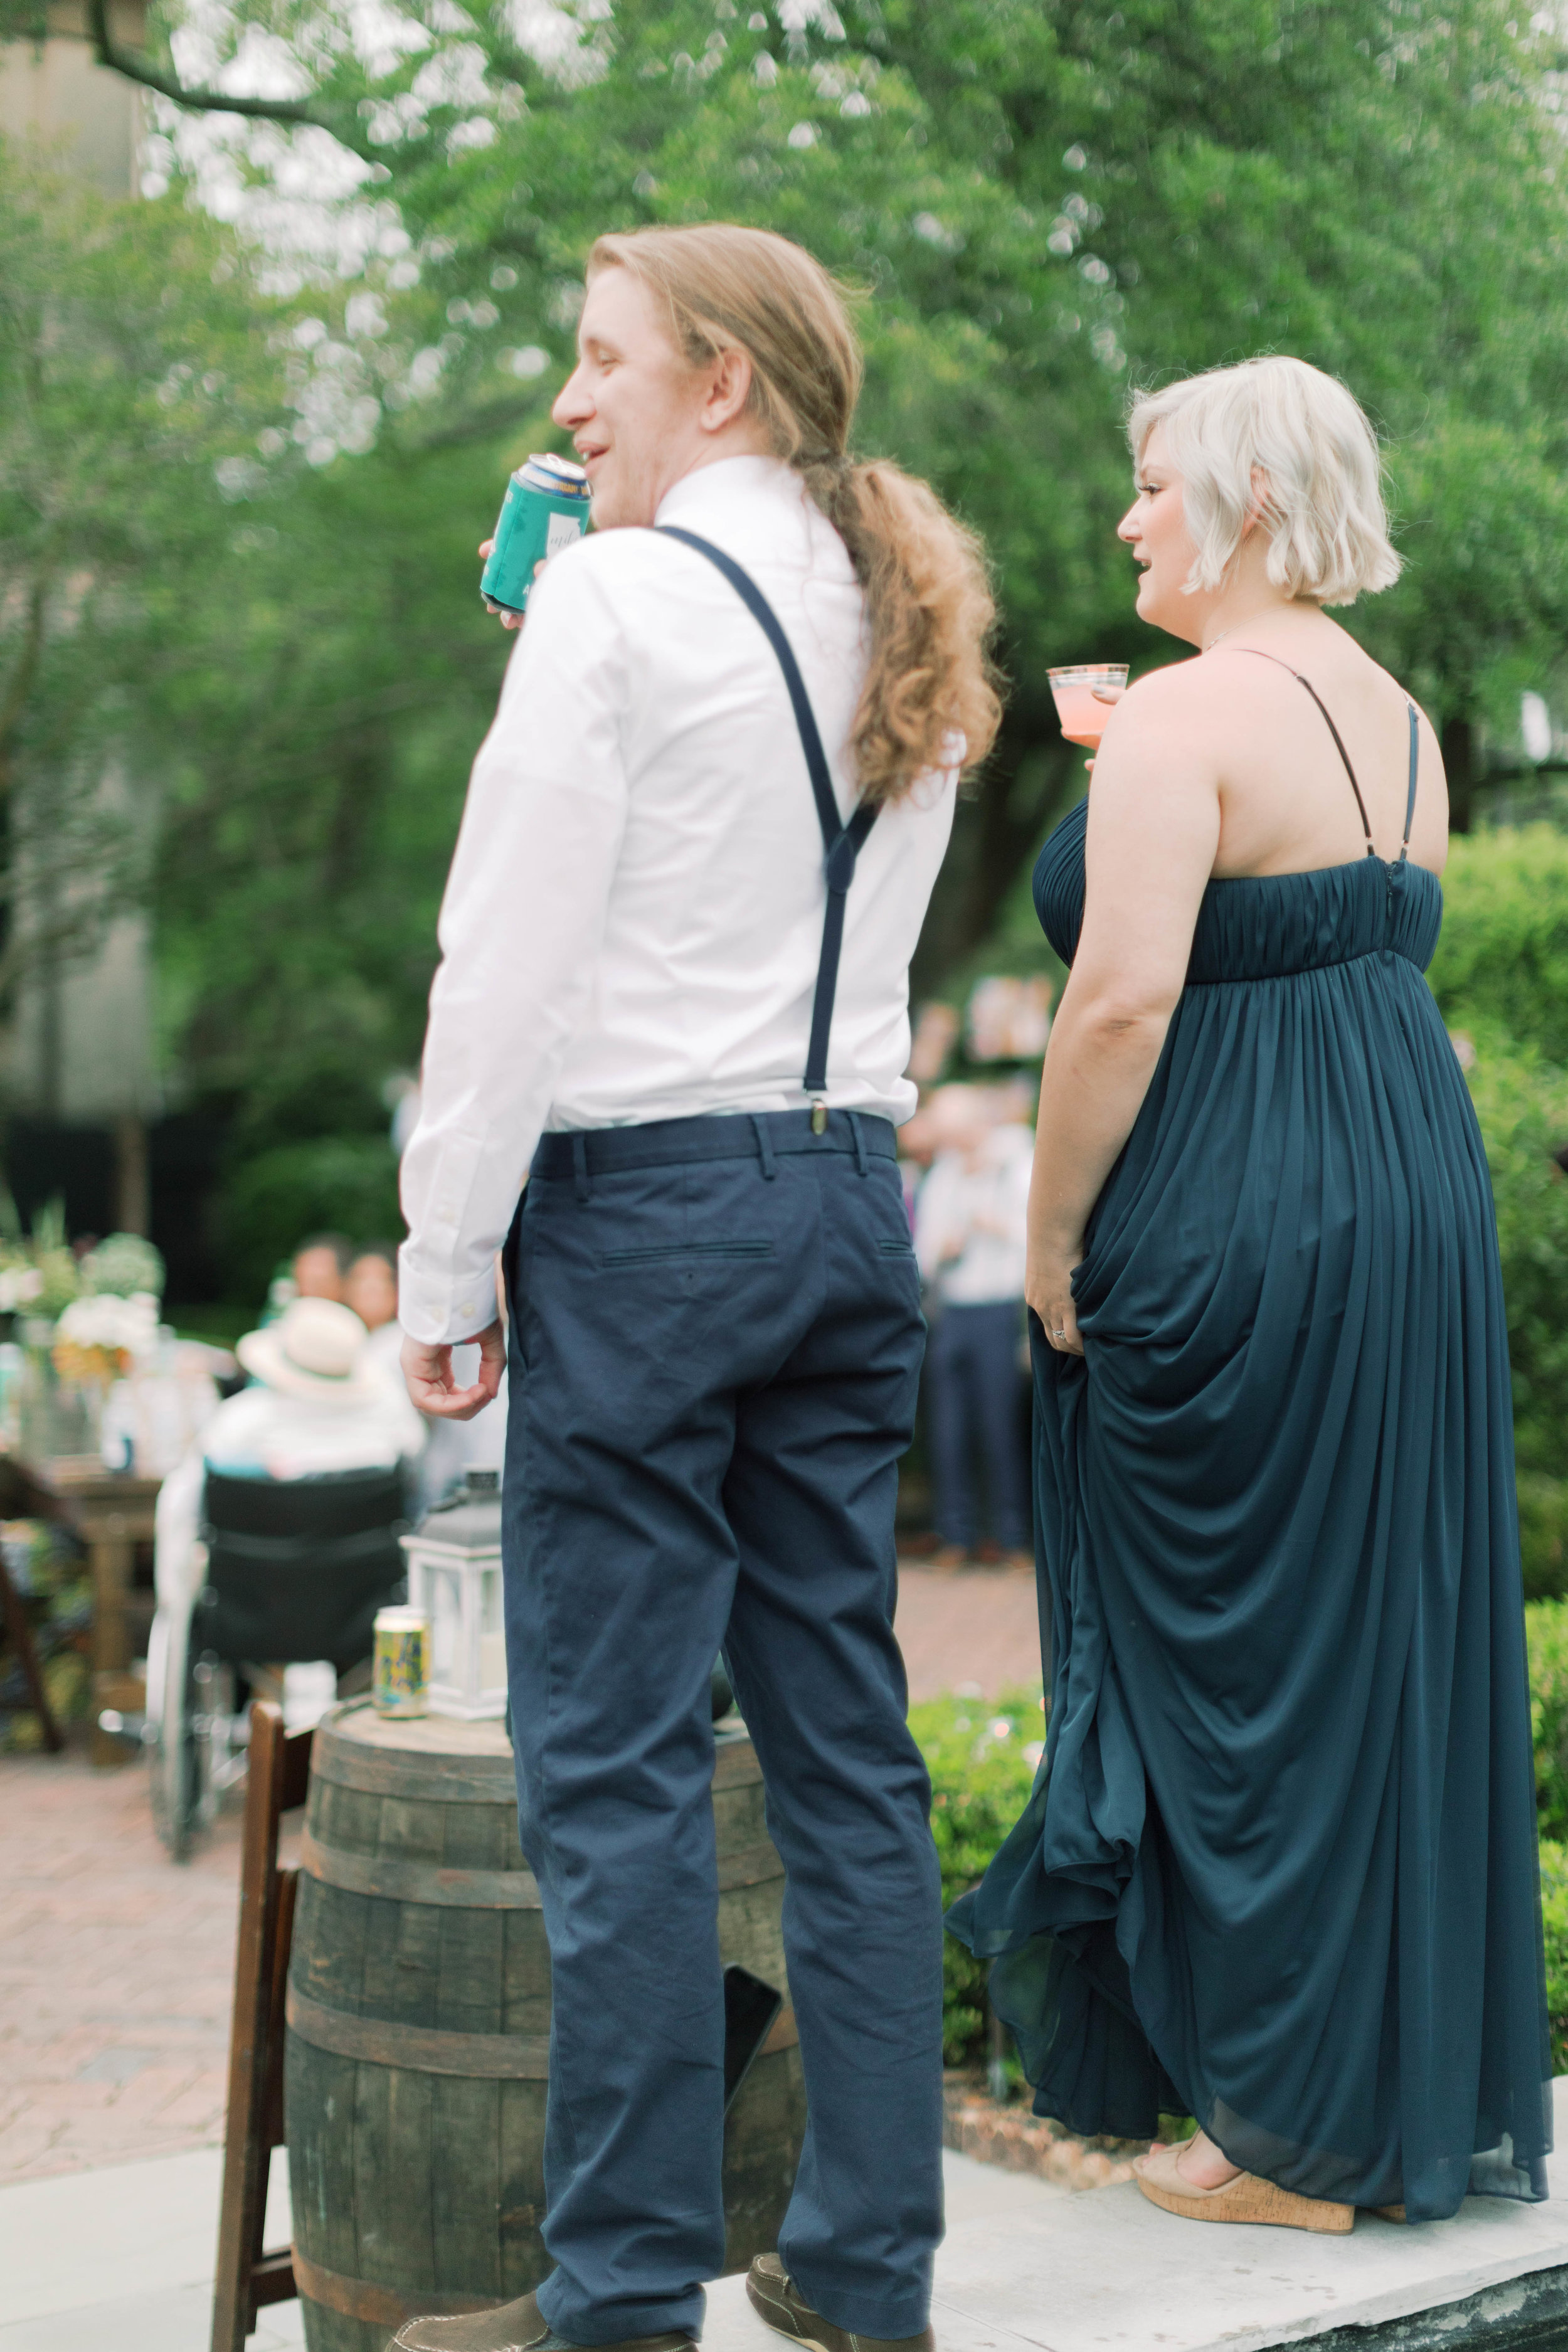  ivory-and-beau-wedding-holly-and-mike-how-to-incorporate-dogs-into-your-wedding-day-pastel-wedding-inspo-savannah-wedding-inspiration-bright-wedding-flowers-southern-wedding-style-savannah-classic-wedding-flower-crown-wedding-classic-southern-weddin